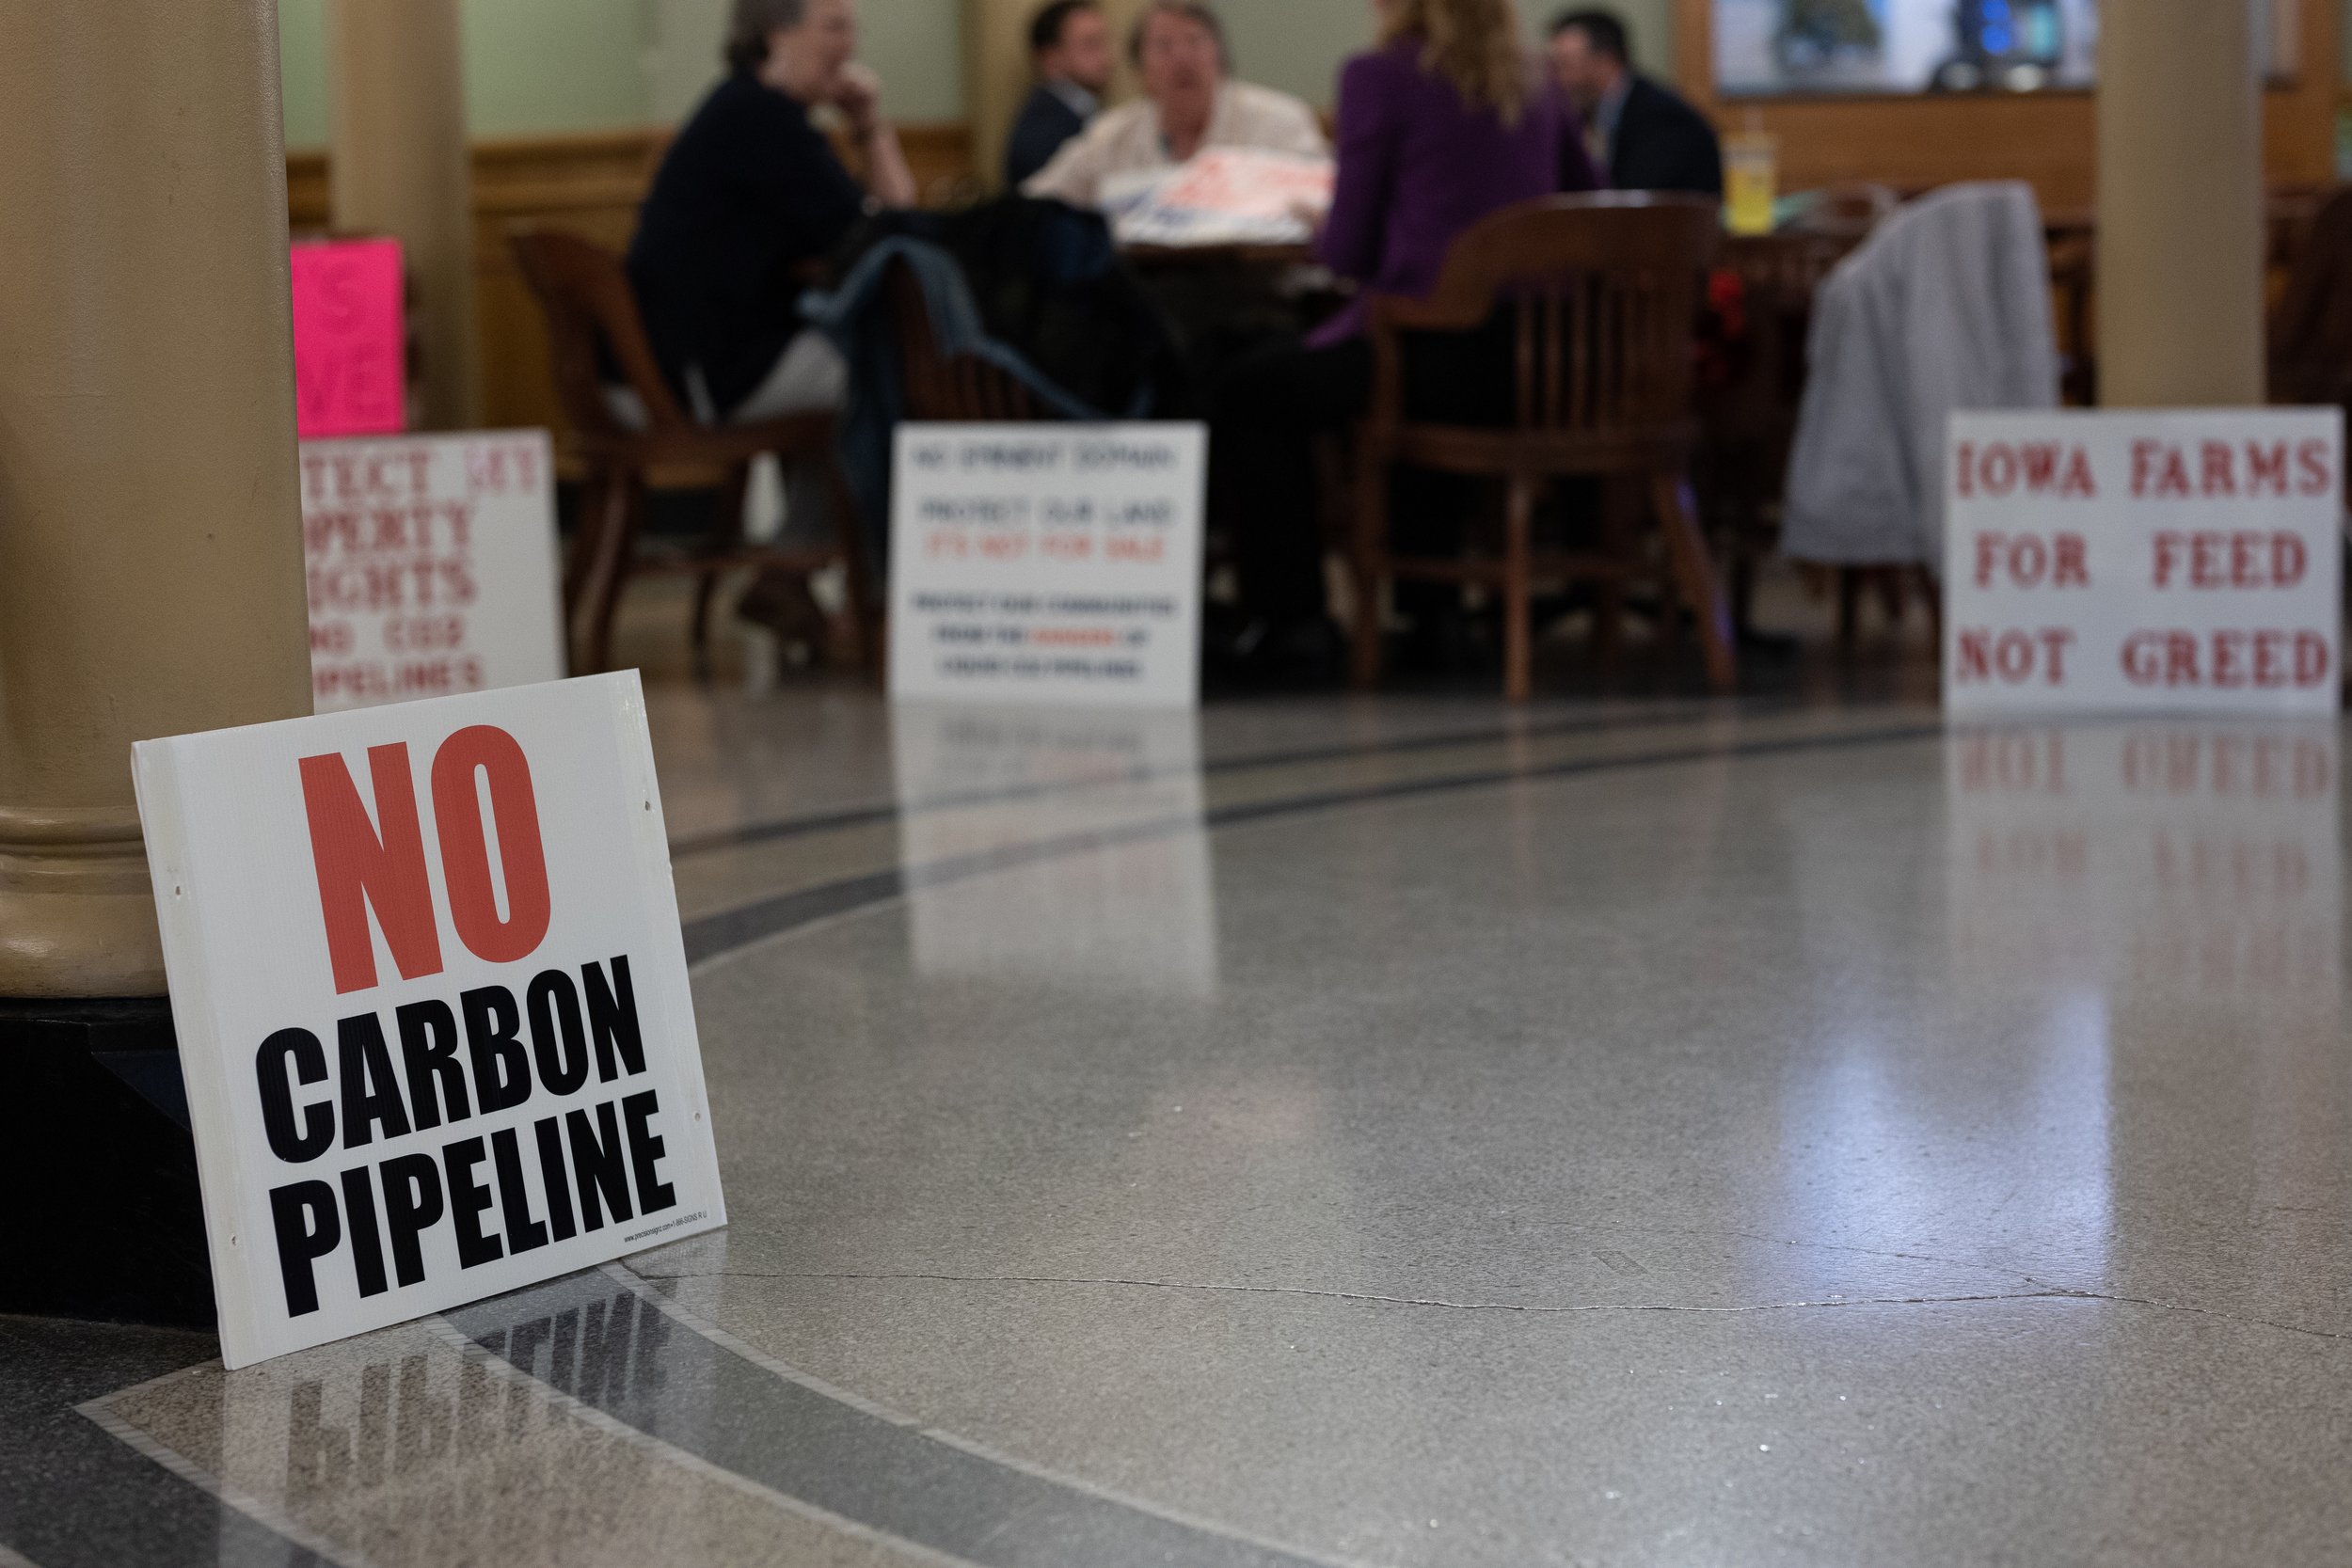 Iowa House passes bipartisan bill to curb eminent domain abuse by proposed CO2 pipelines, bill now heads to Senate